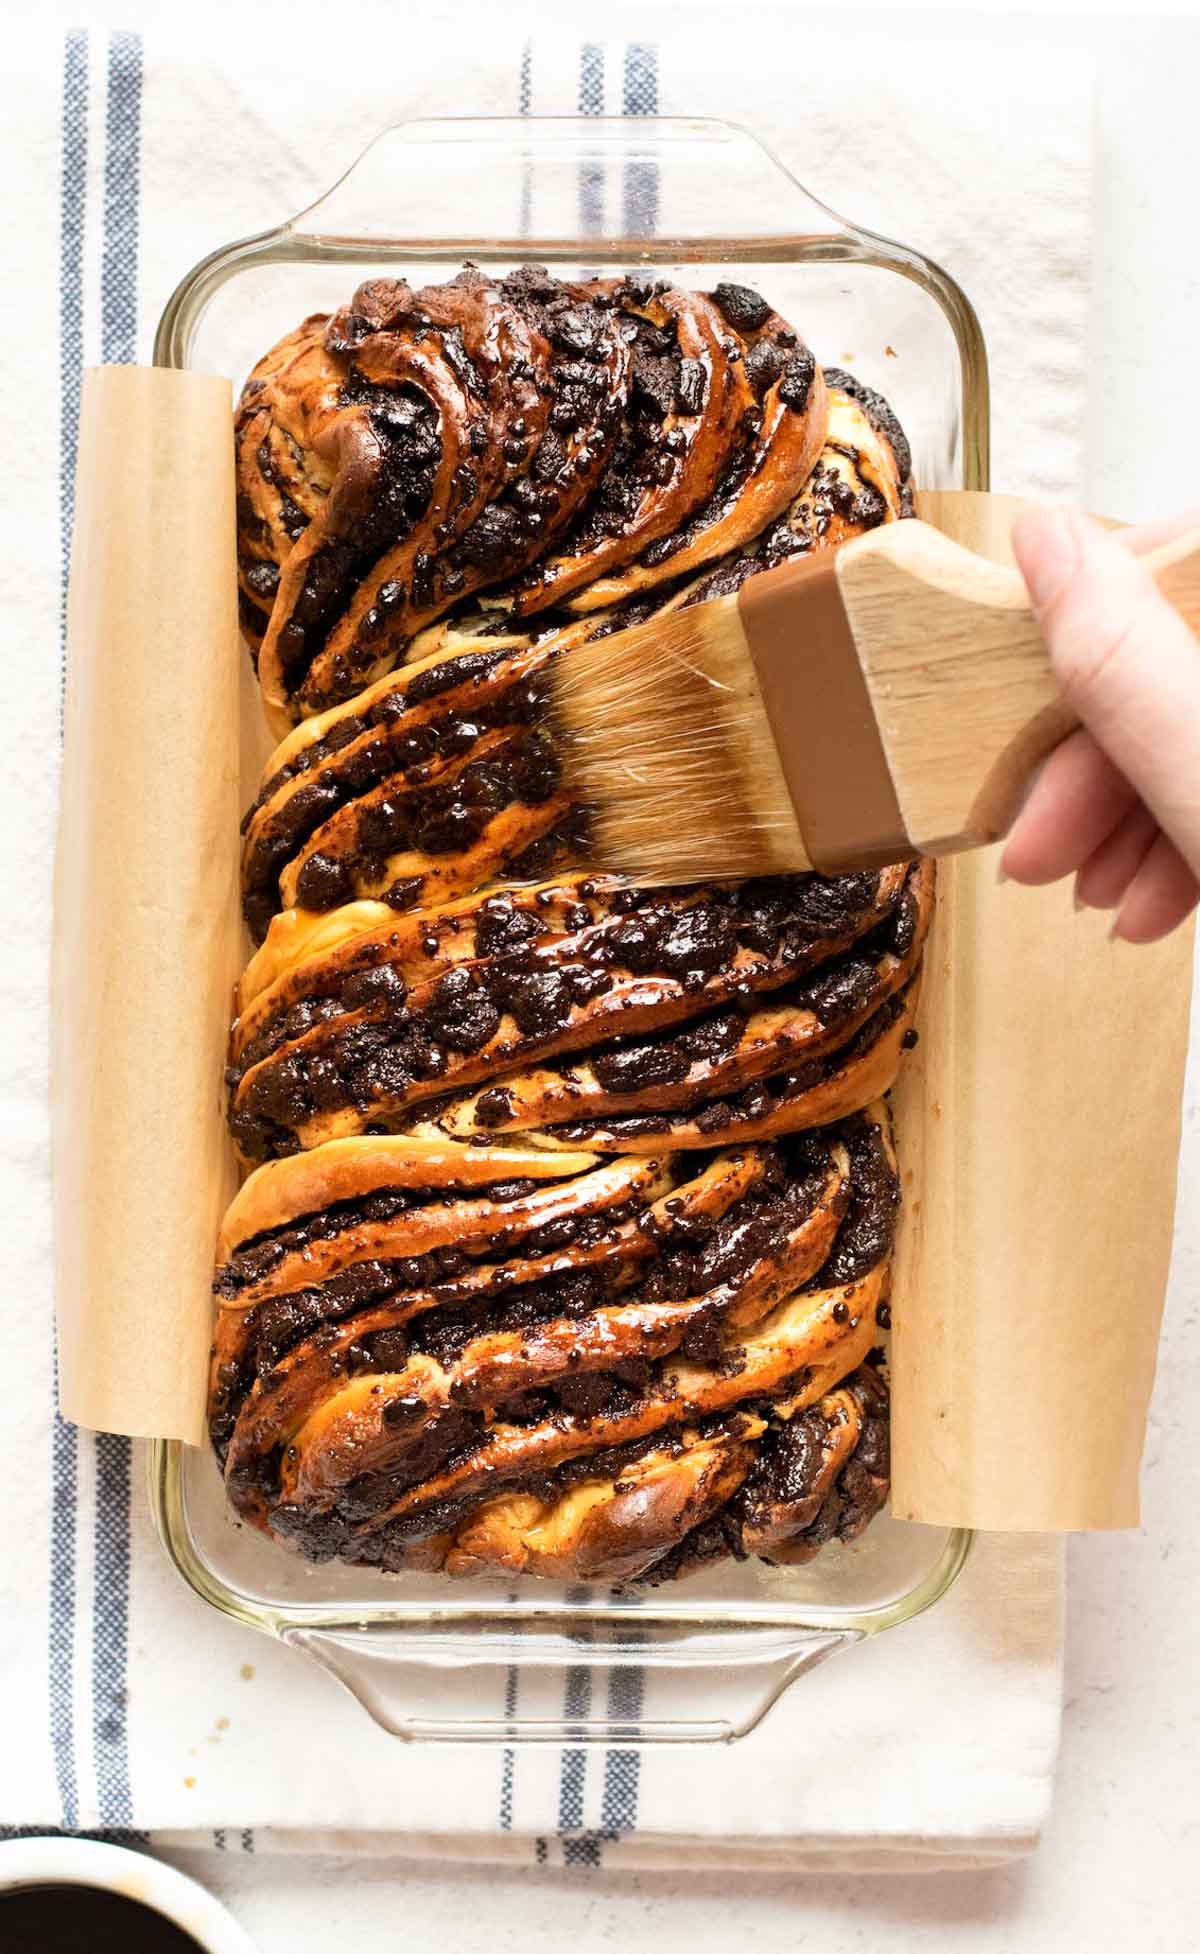 A pastry brush brushes espresso simple syrup on top of the babka loaf.